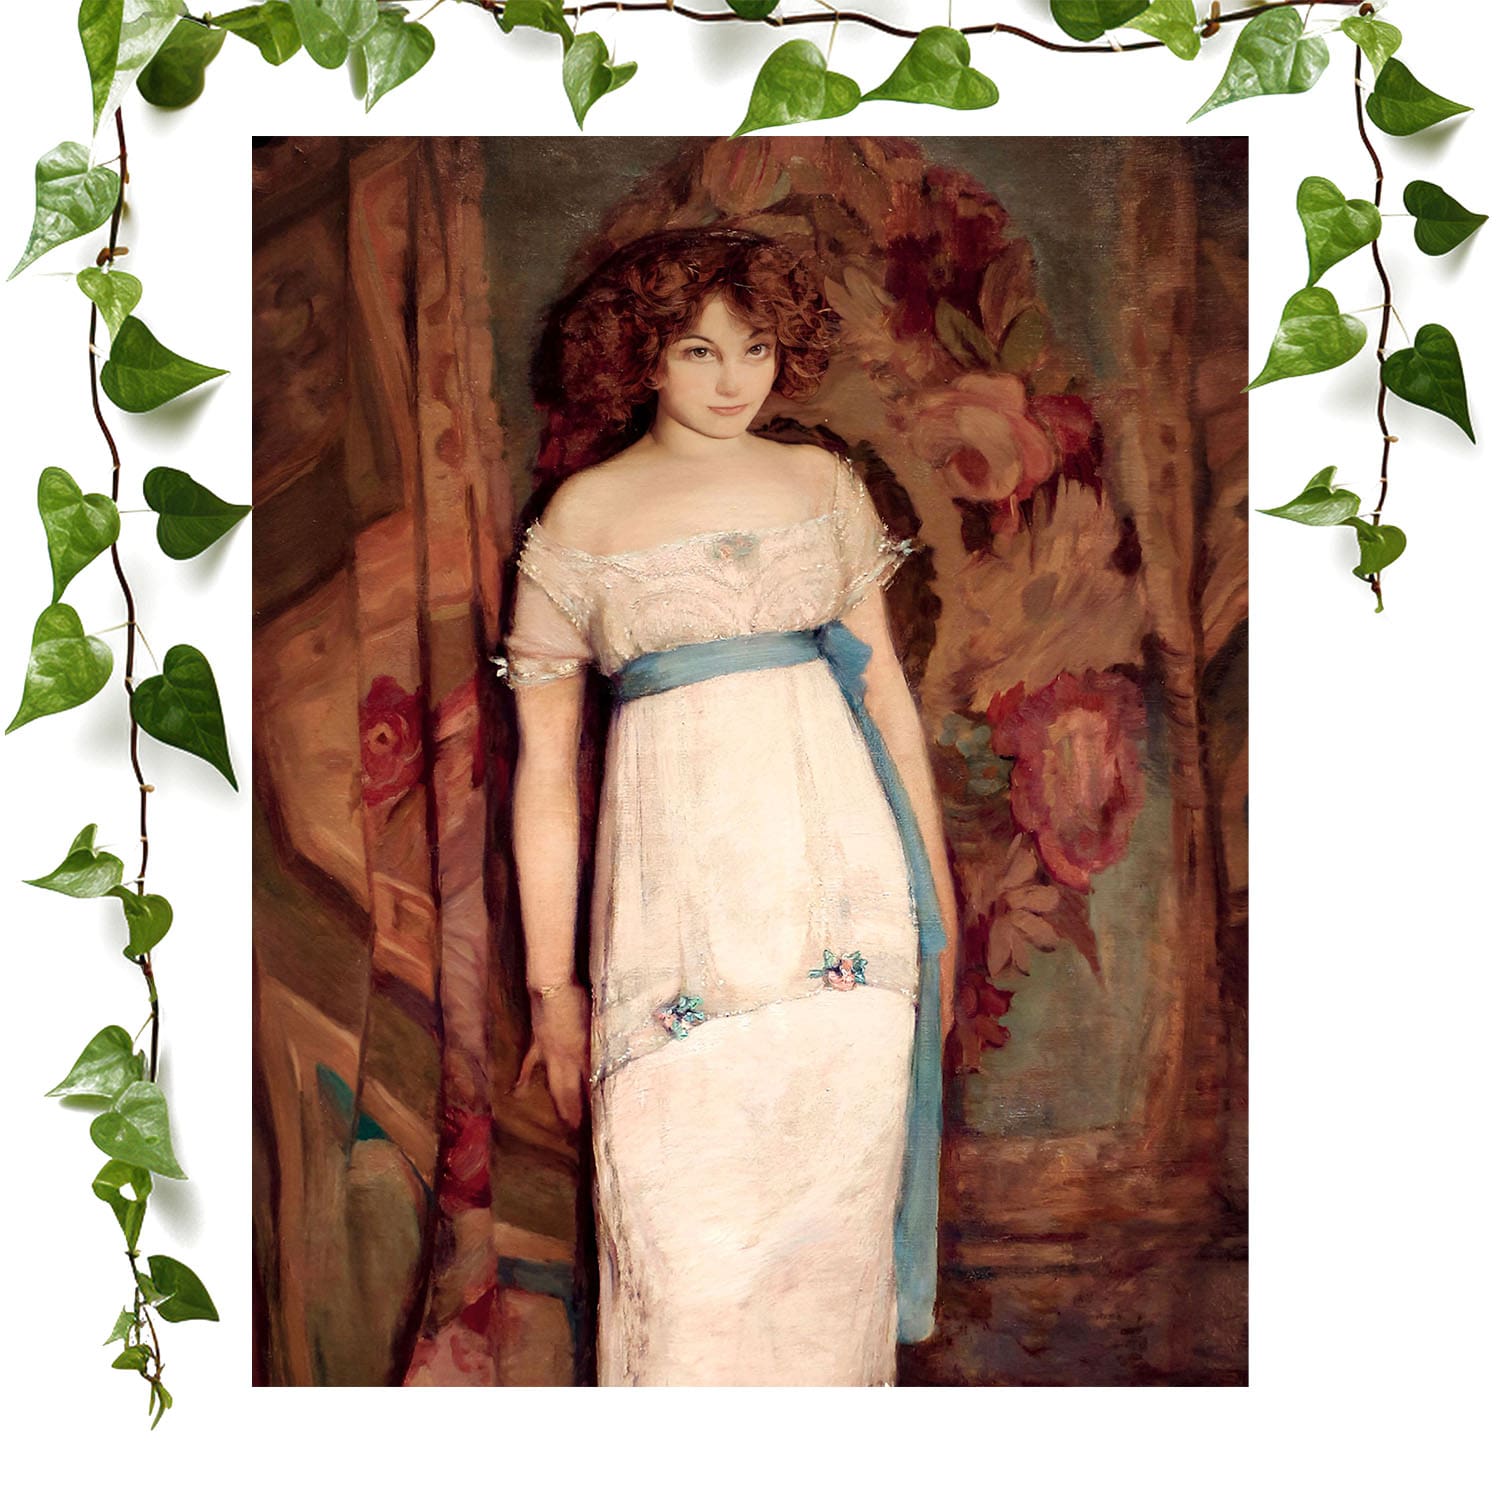 Young Maiden art prints featuring a victorian era, vintage wall art room decor